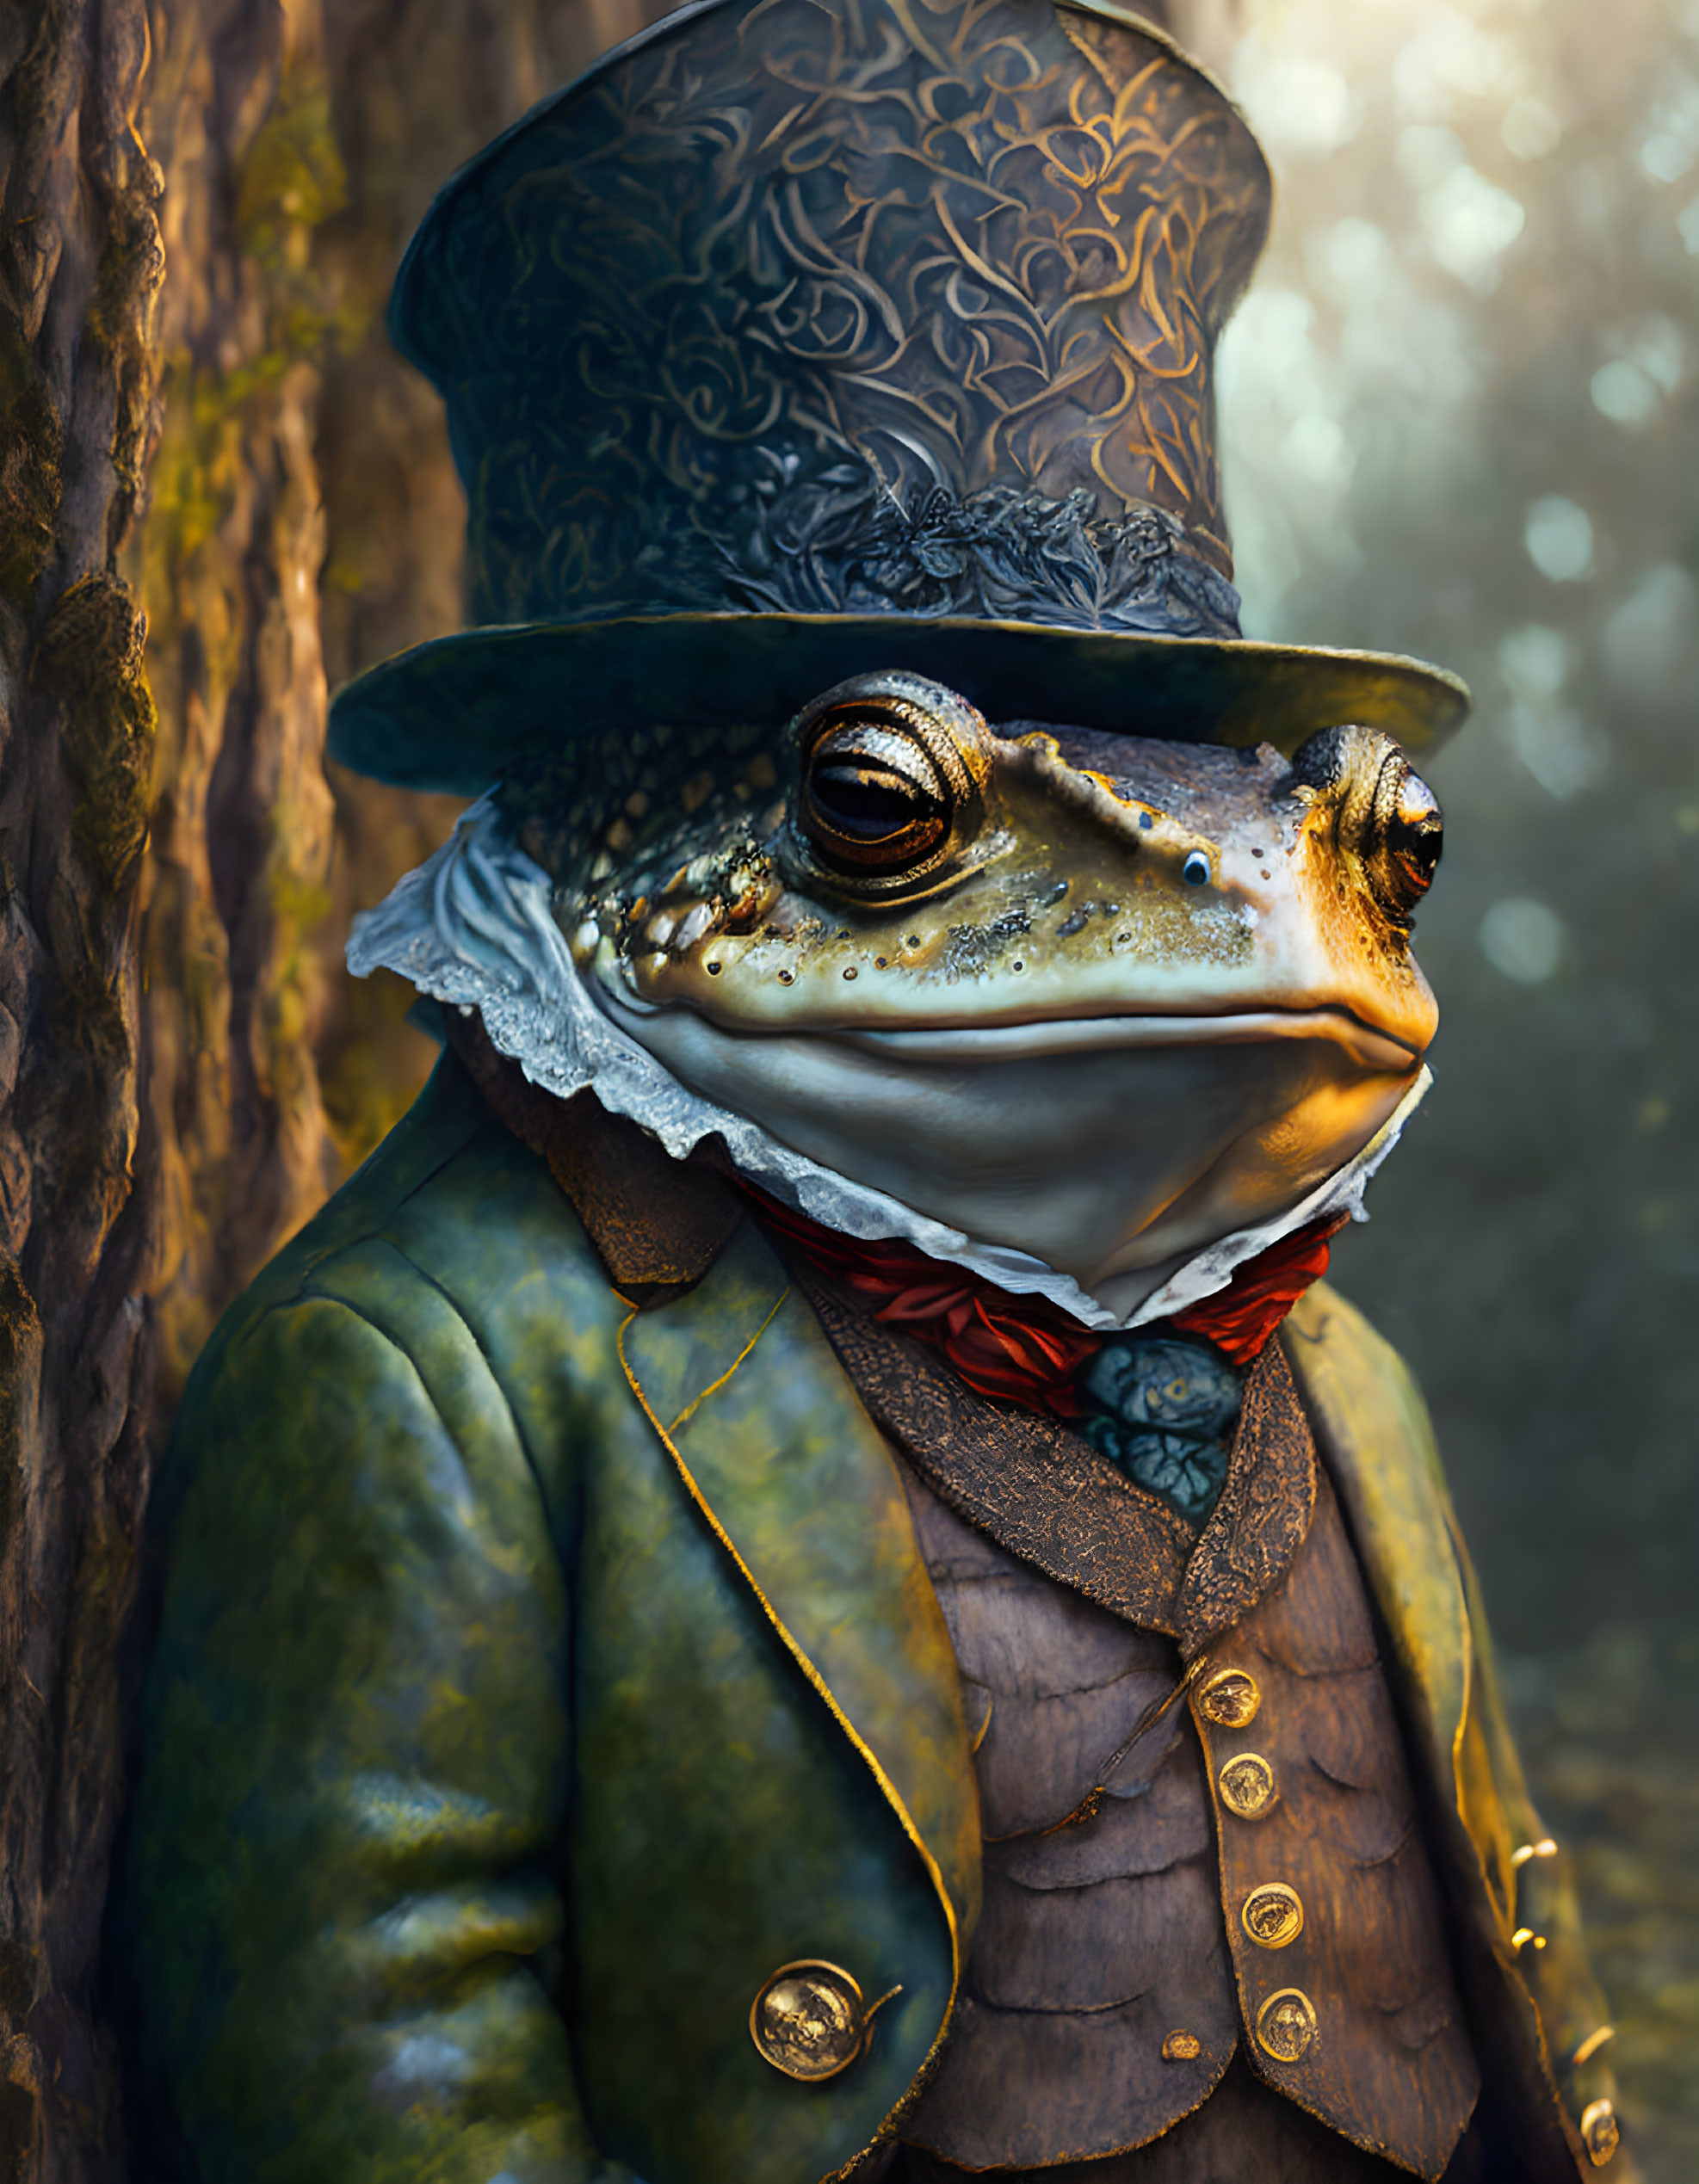 Anthropomorphic frog in Victorian attire leaning on tree trunk